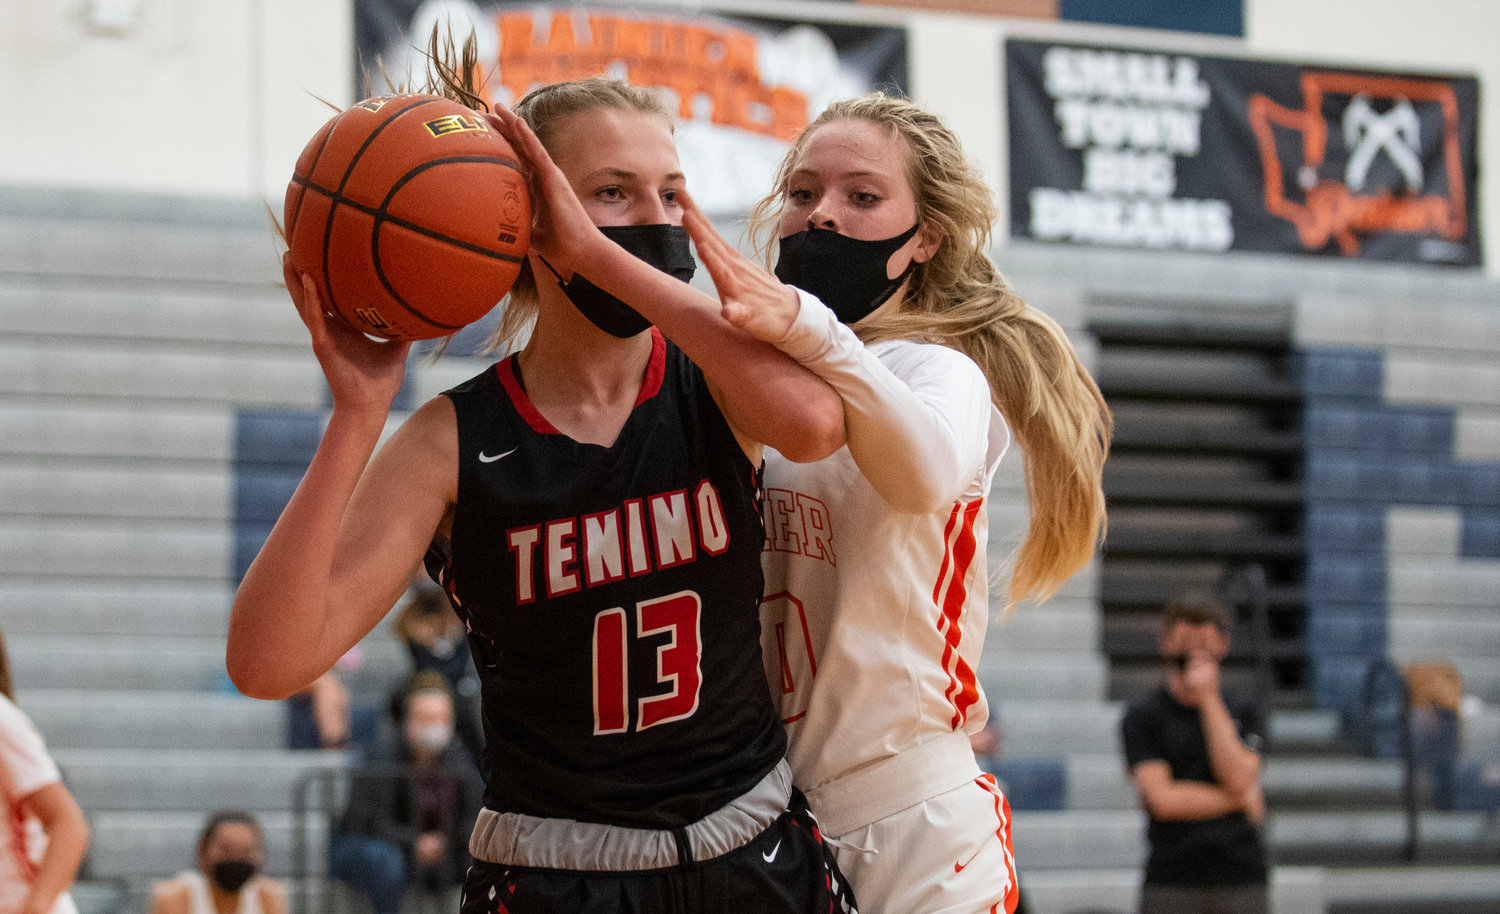 Tenino's Rylee Jones (13) looks for an open pass while Rainier's Isabella Holmes defends.